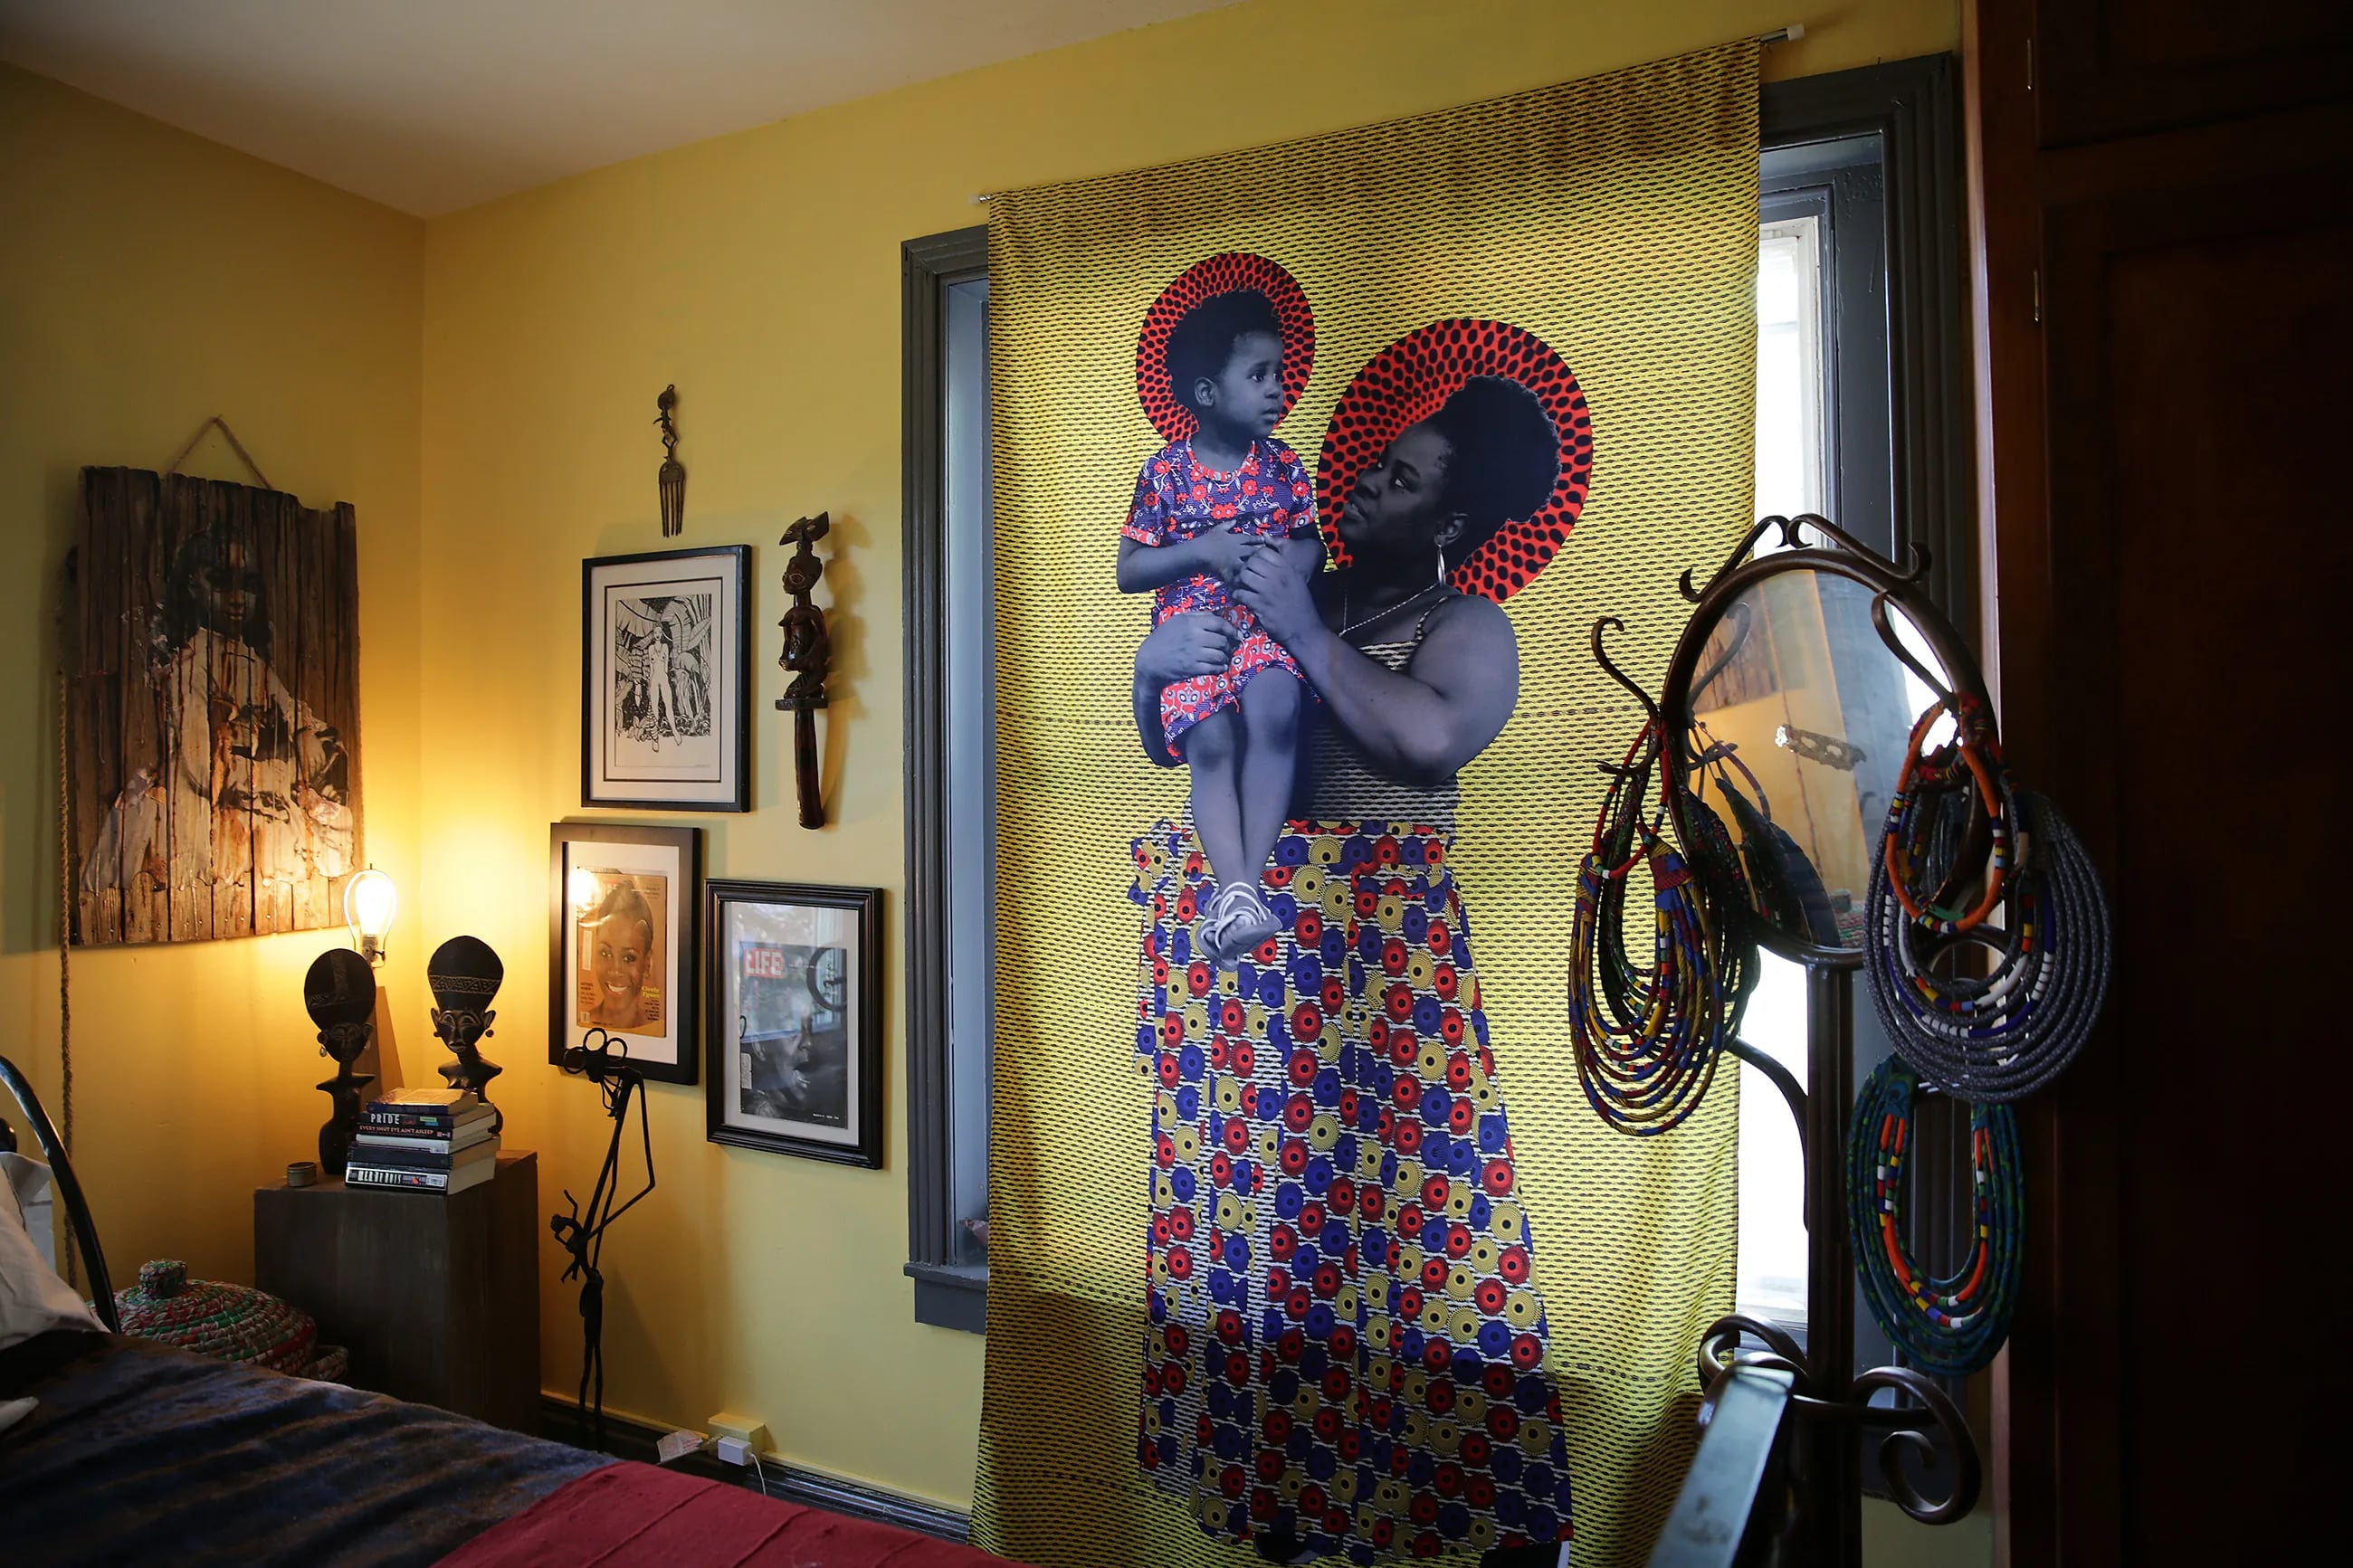 The second floor bedroom curated by Syretta Scott in The Colored Girls Museum.